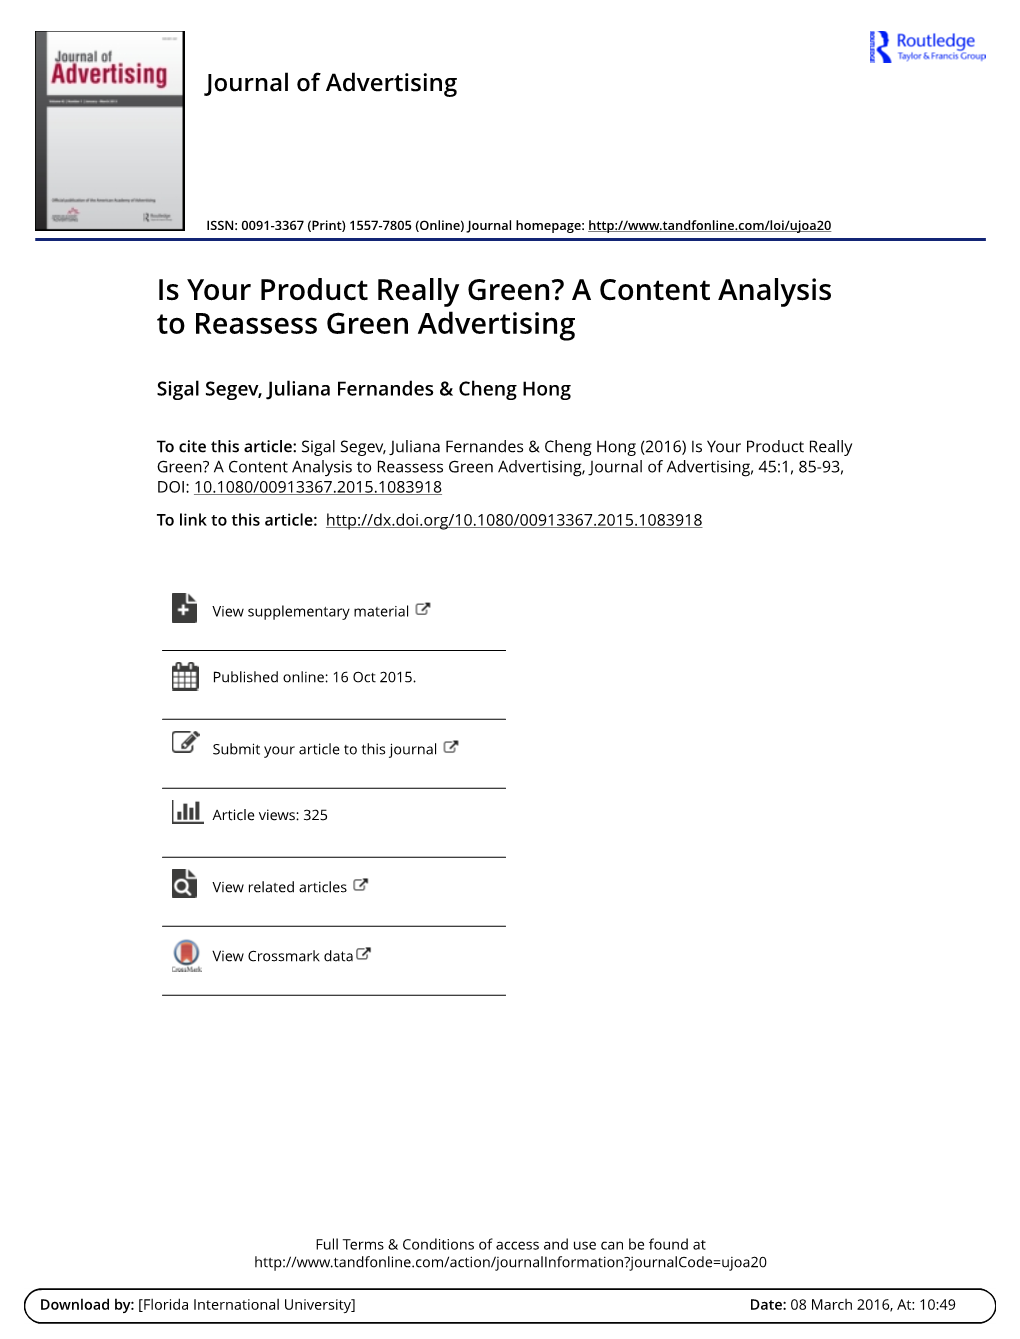 A Content Analysis to Reassess Green Advertising